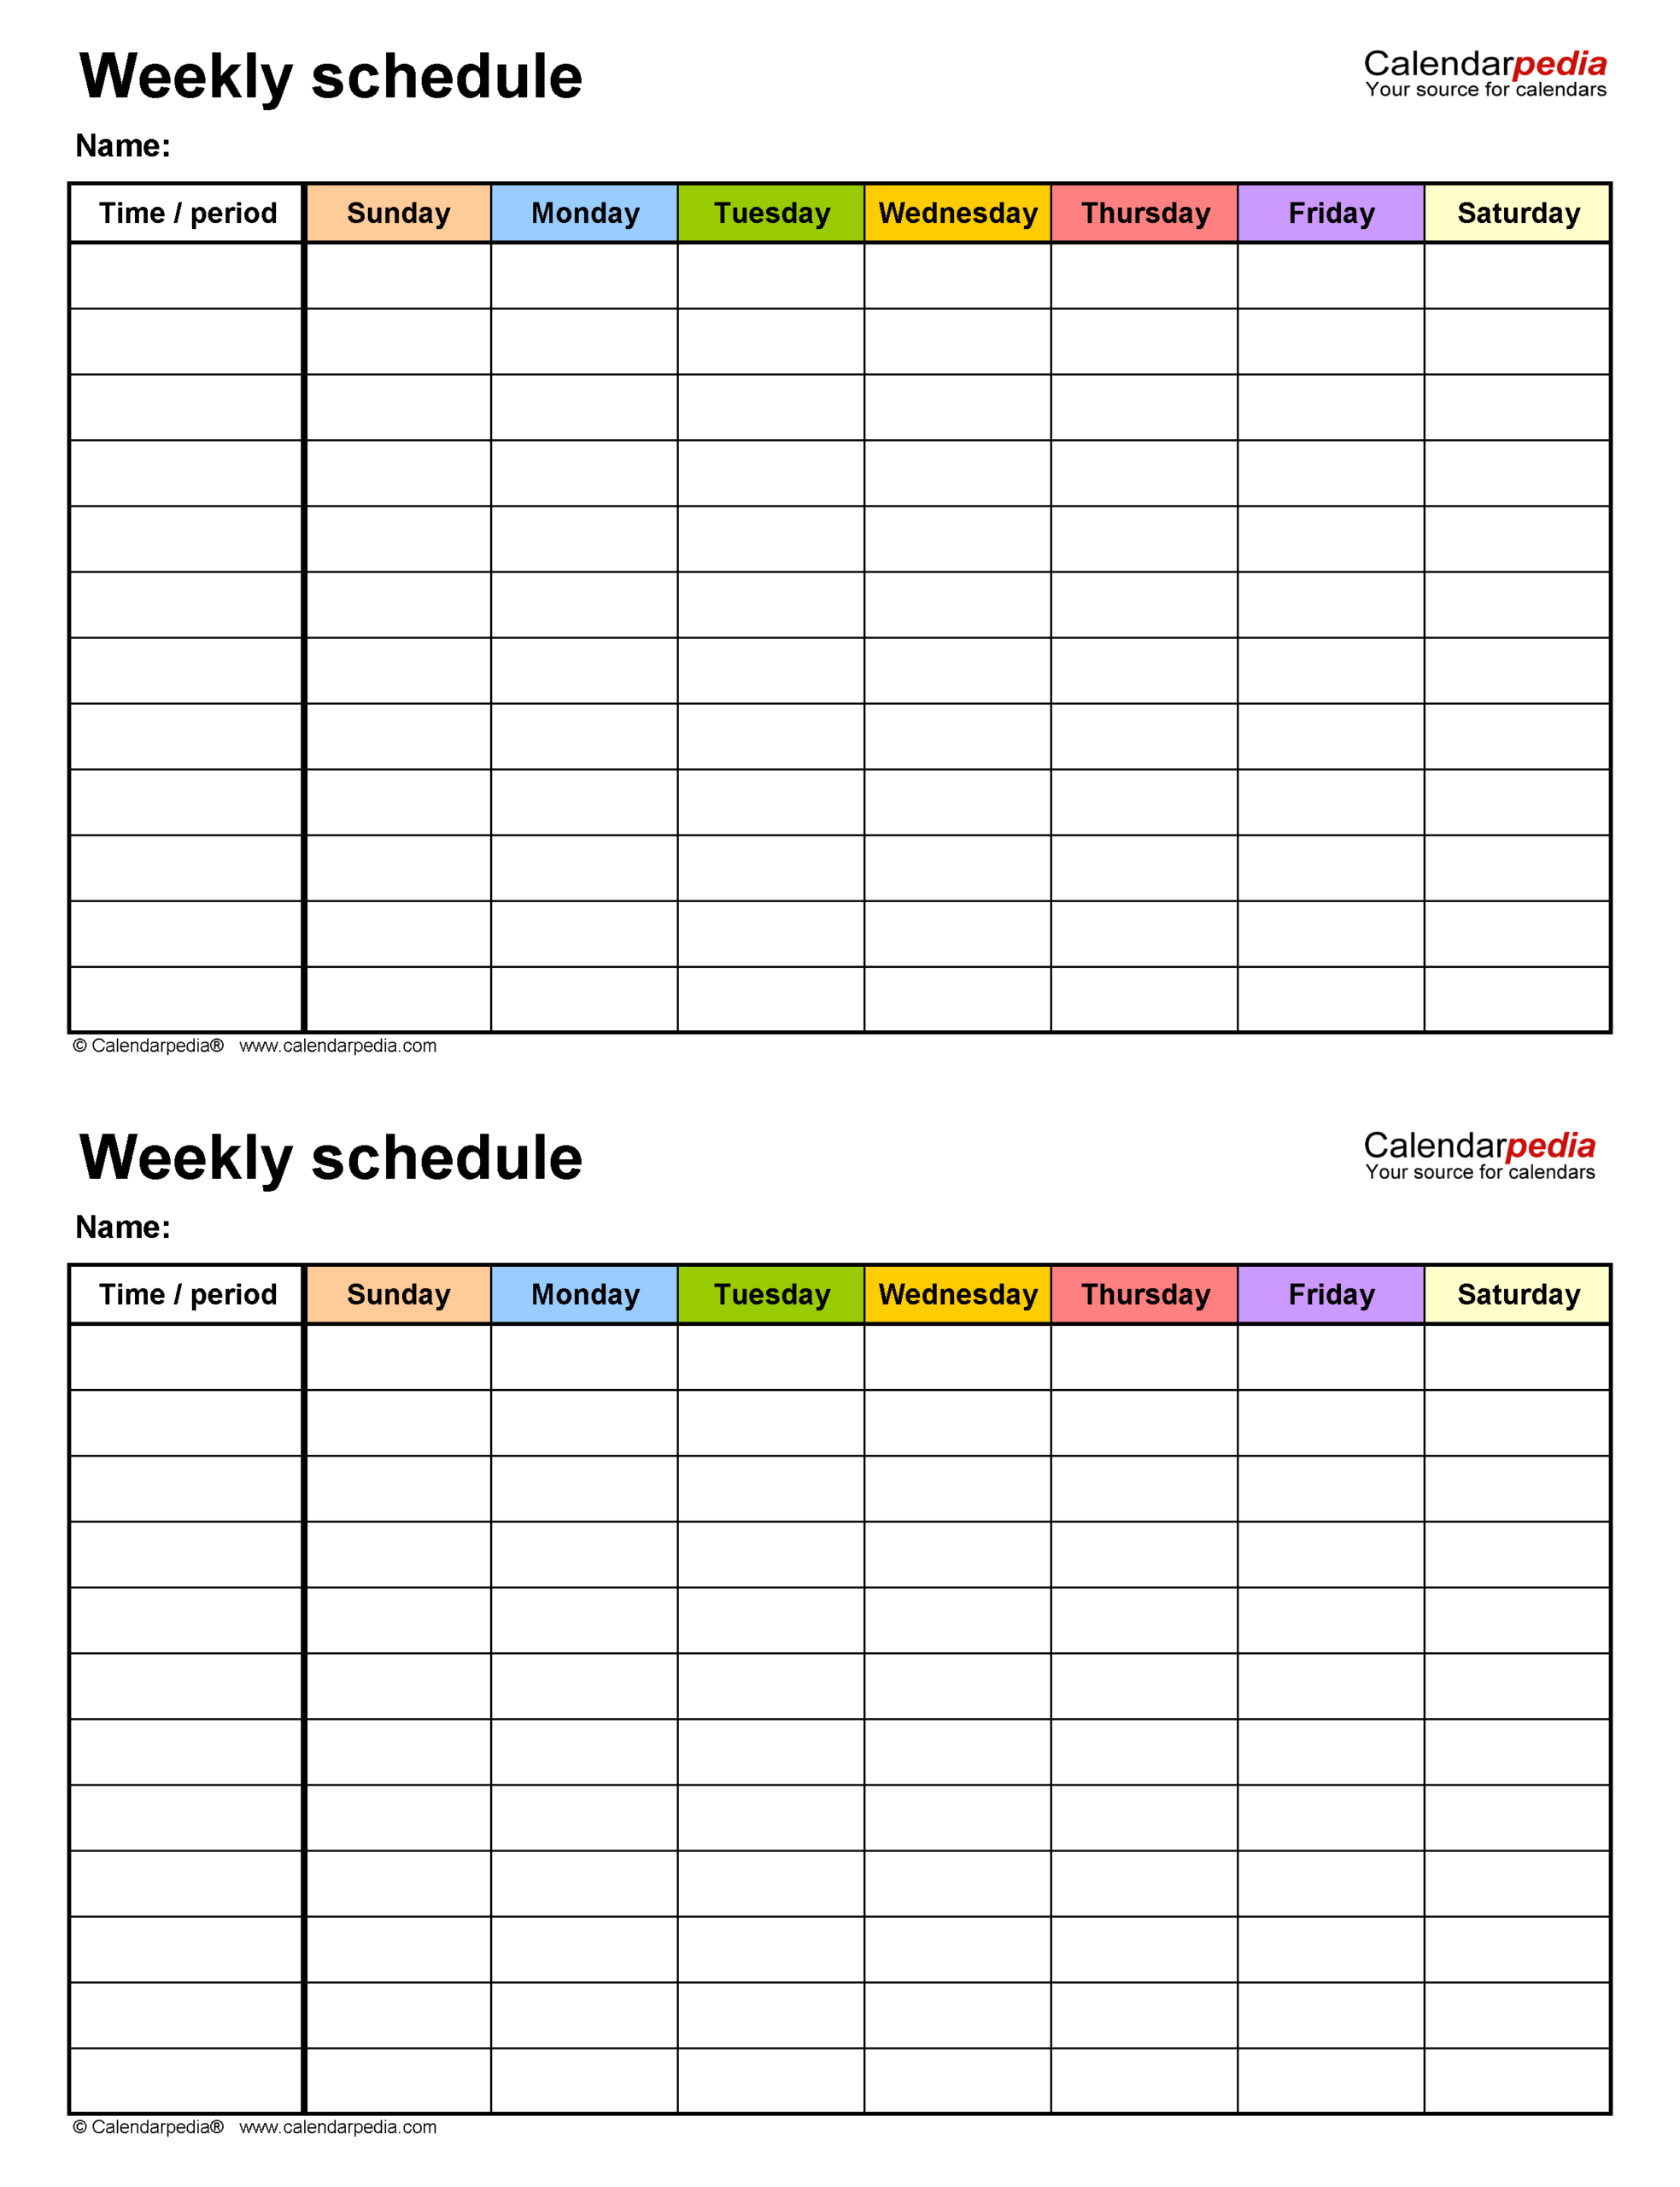 Free Weekly Schedule Templates For Word  18 Templates for 2 Week Calander